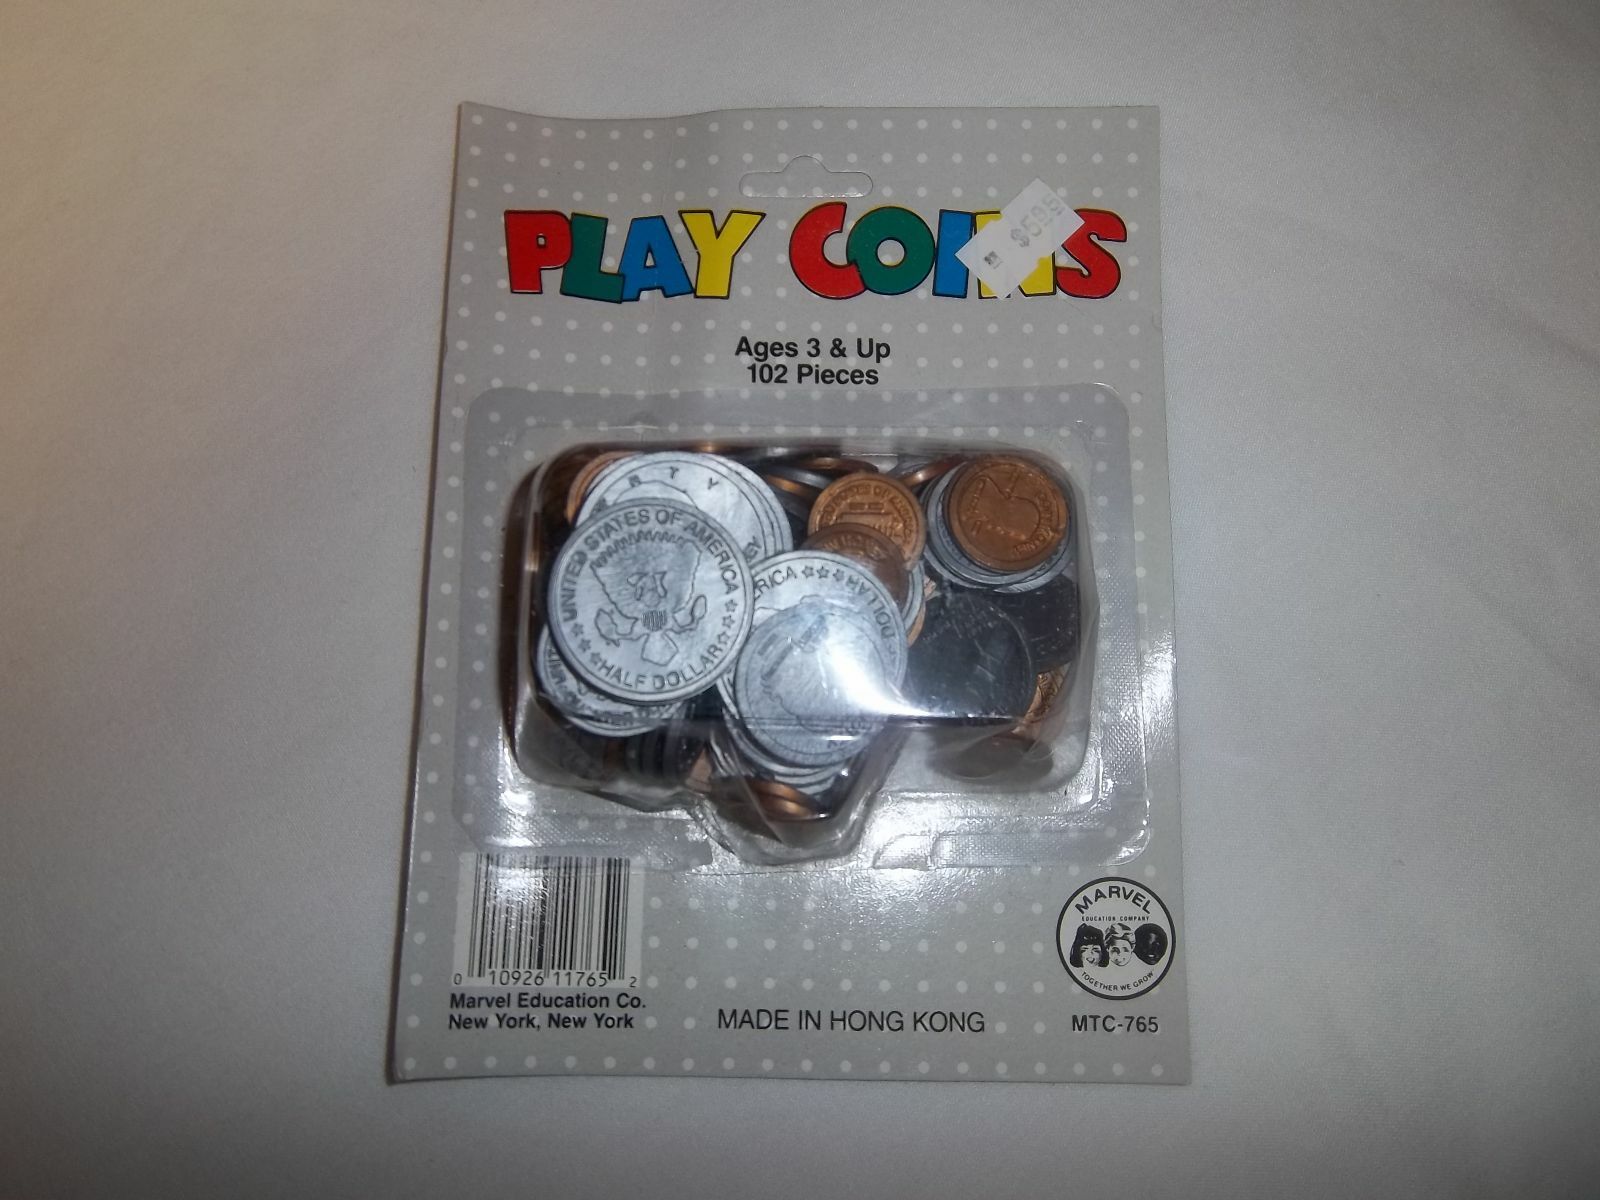 MARVEL MTC765 PLAY COINS(PACK OF 102 PLASTIC COINS)